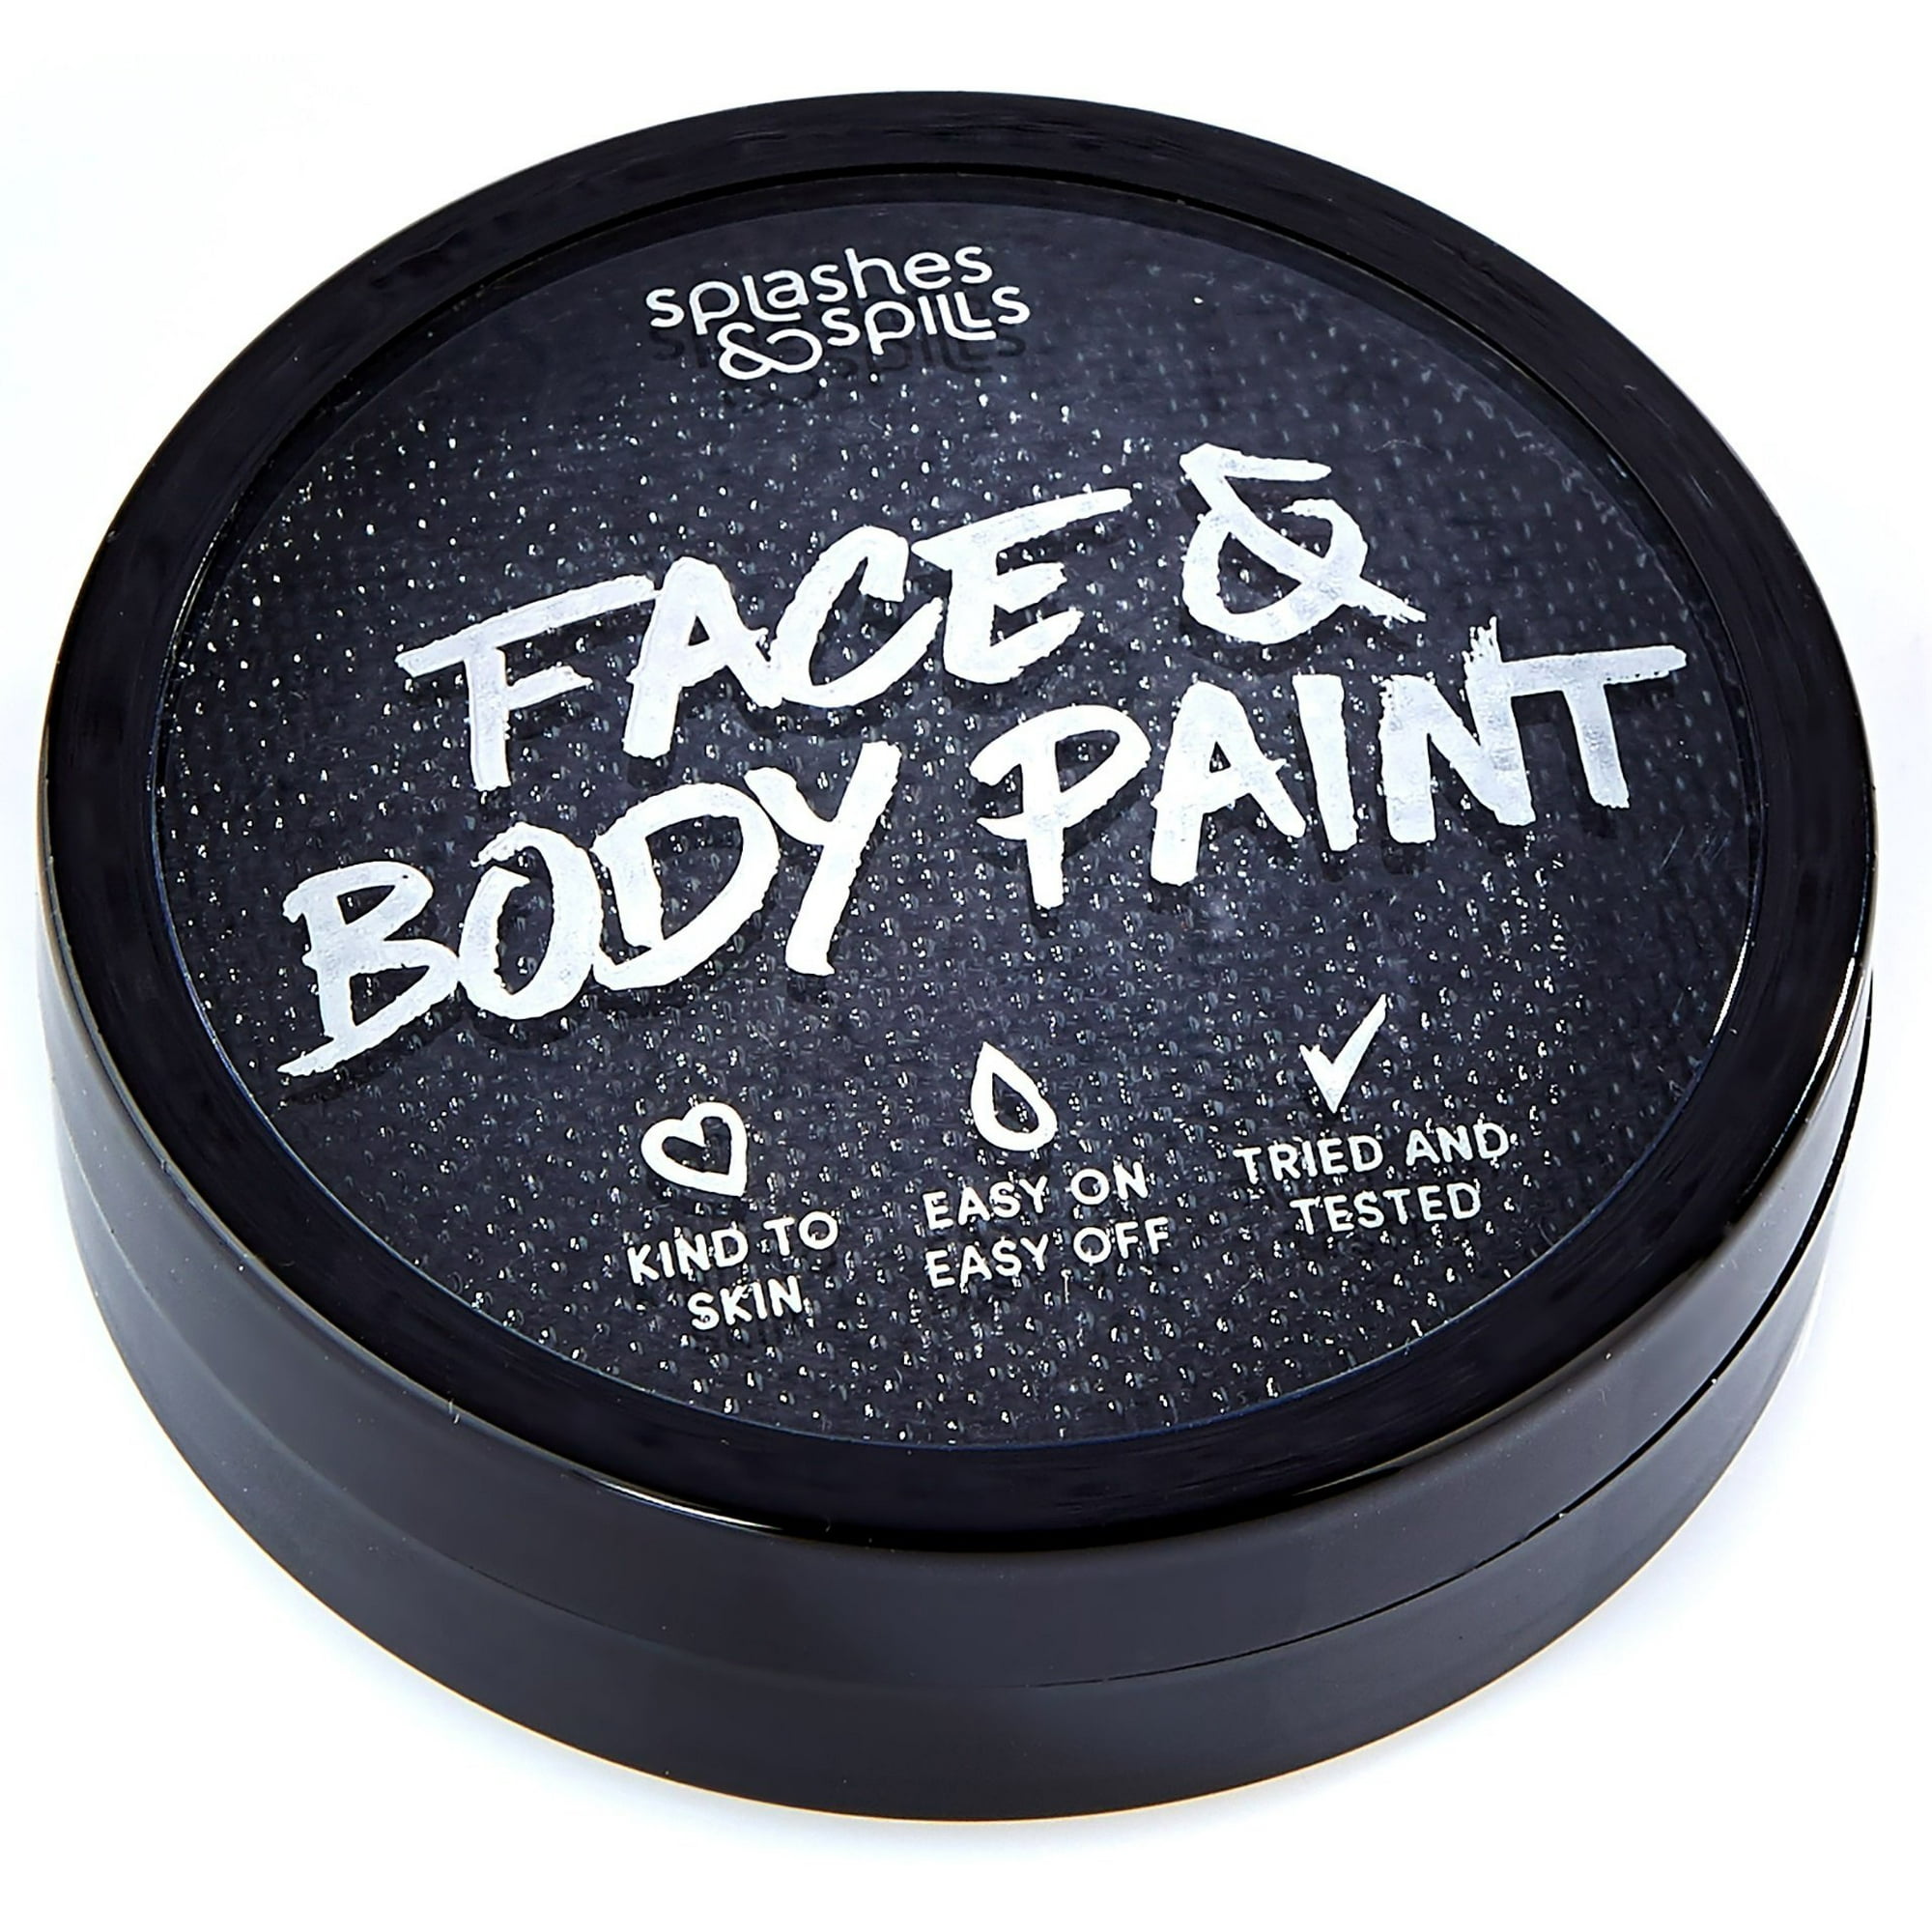 Face and Body Paint Cream - White, 18g Cake Tub - Pretend Costume and Dress  Up Makeup by Splashes & Spills